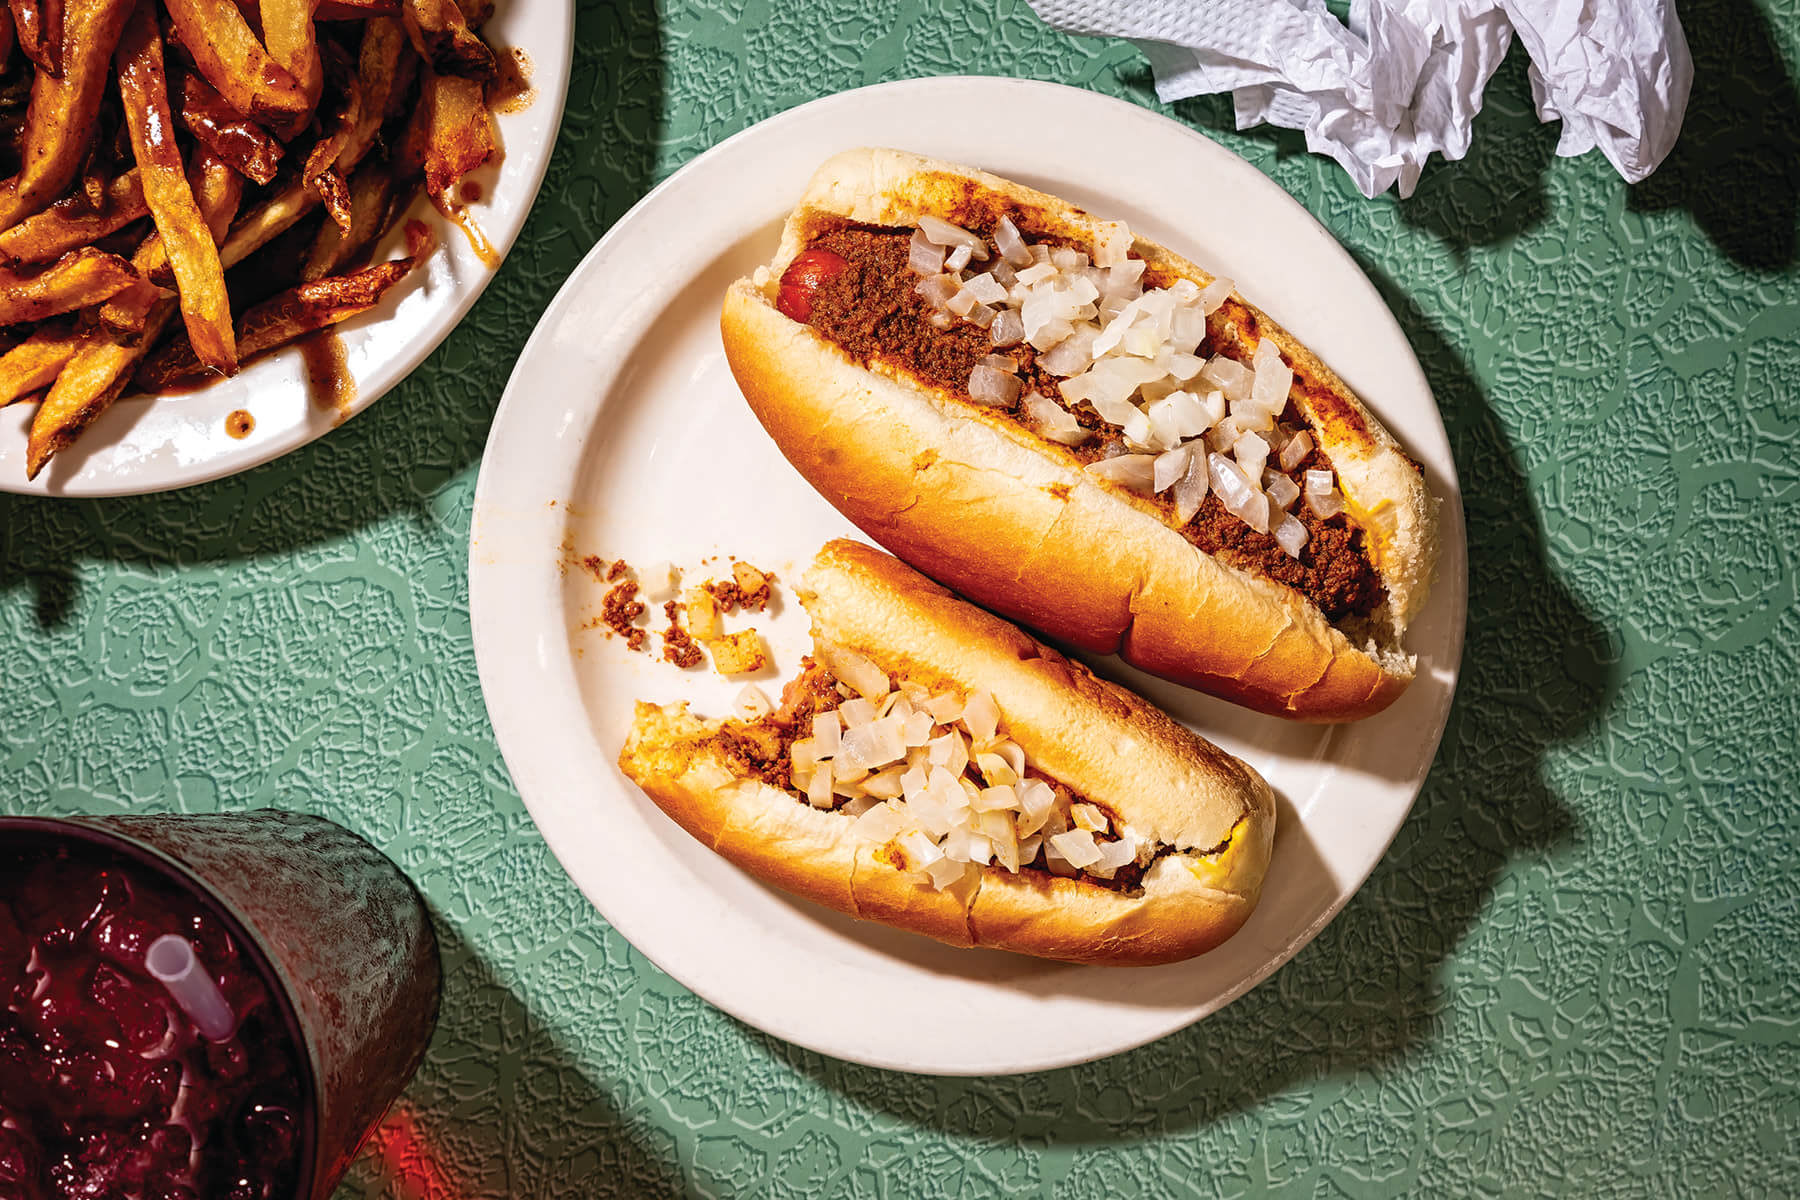 15 Top Hot Dog Spots to Try in Metro Detroit